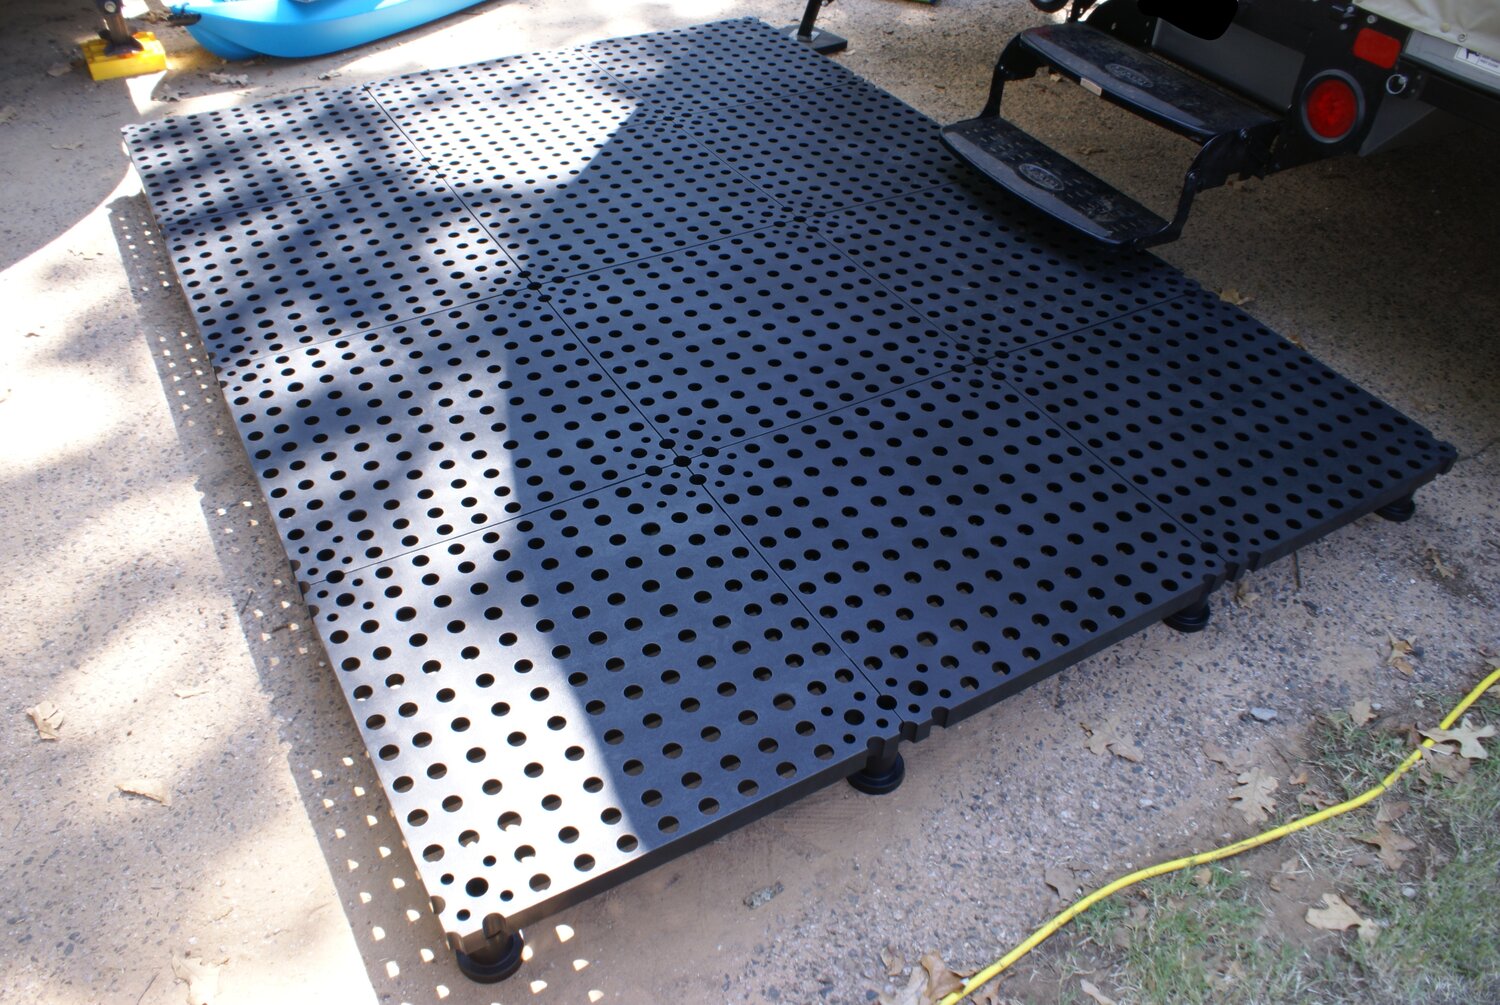 Portable Patio Deck Kit From Travel